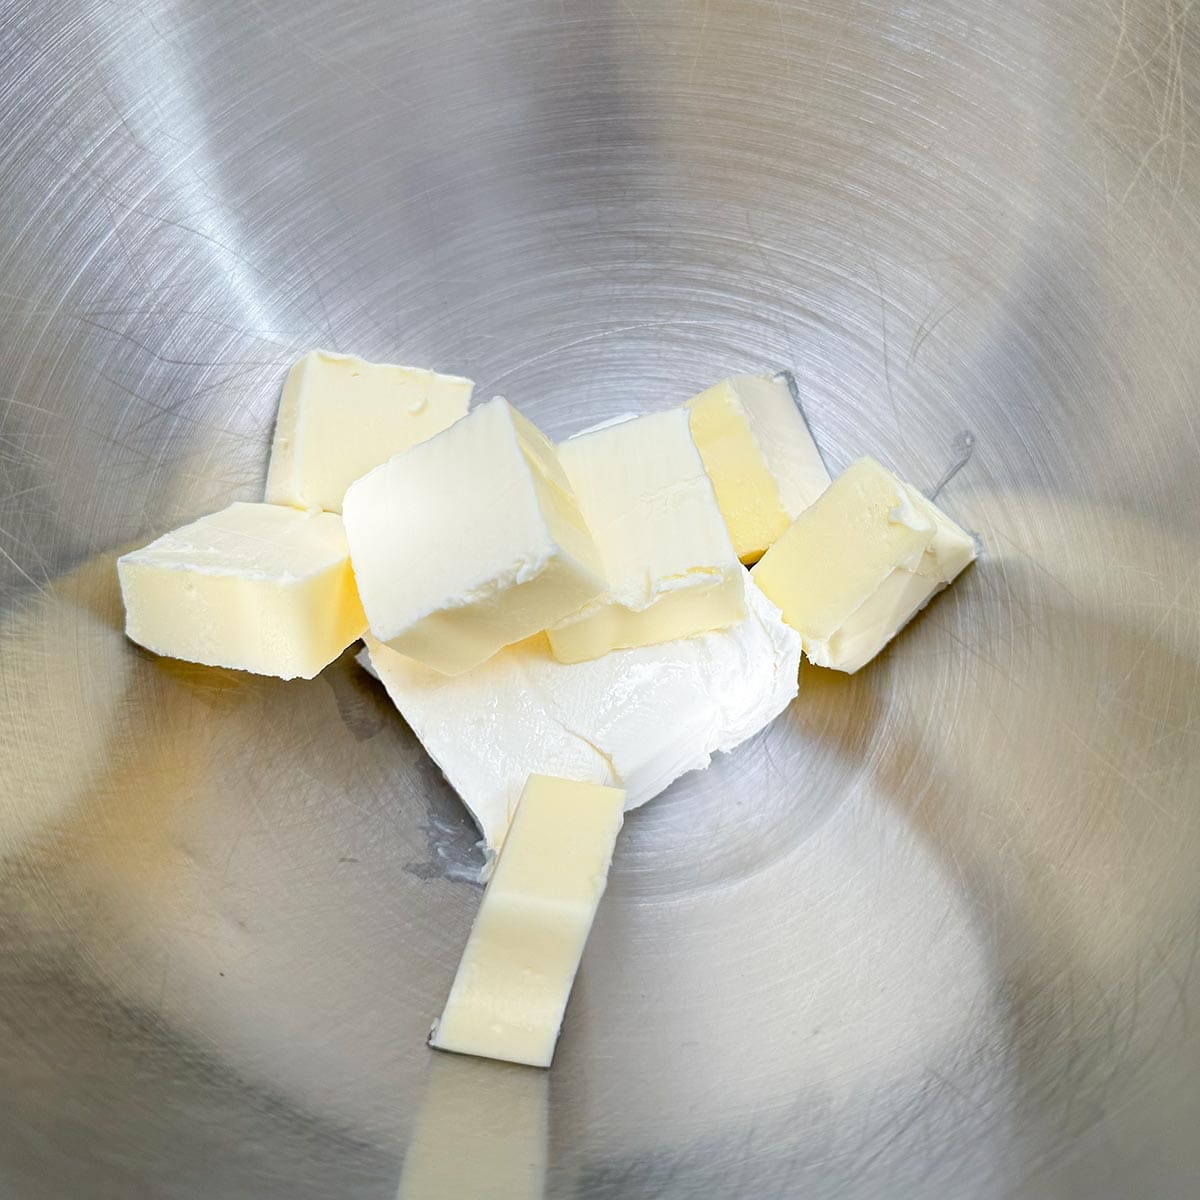 Cubed butter and cream cheese in a mixer bowl.